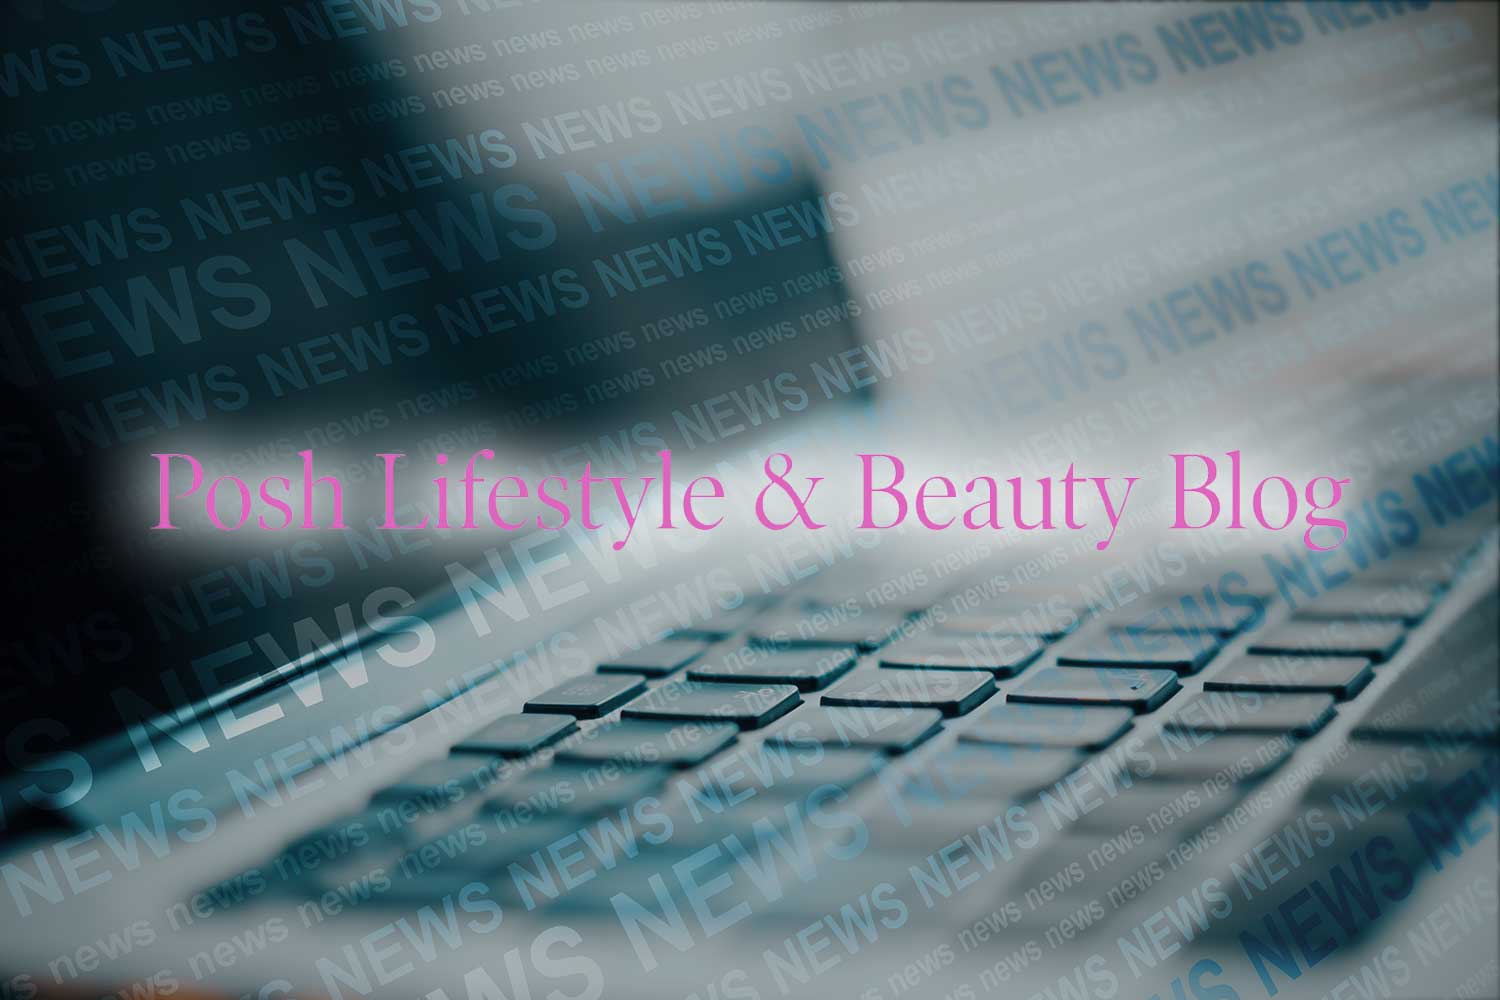 Posh Lifestyle & Beauty Blog: Self Care and Wellness Shopping Guide